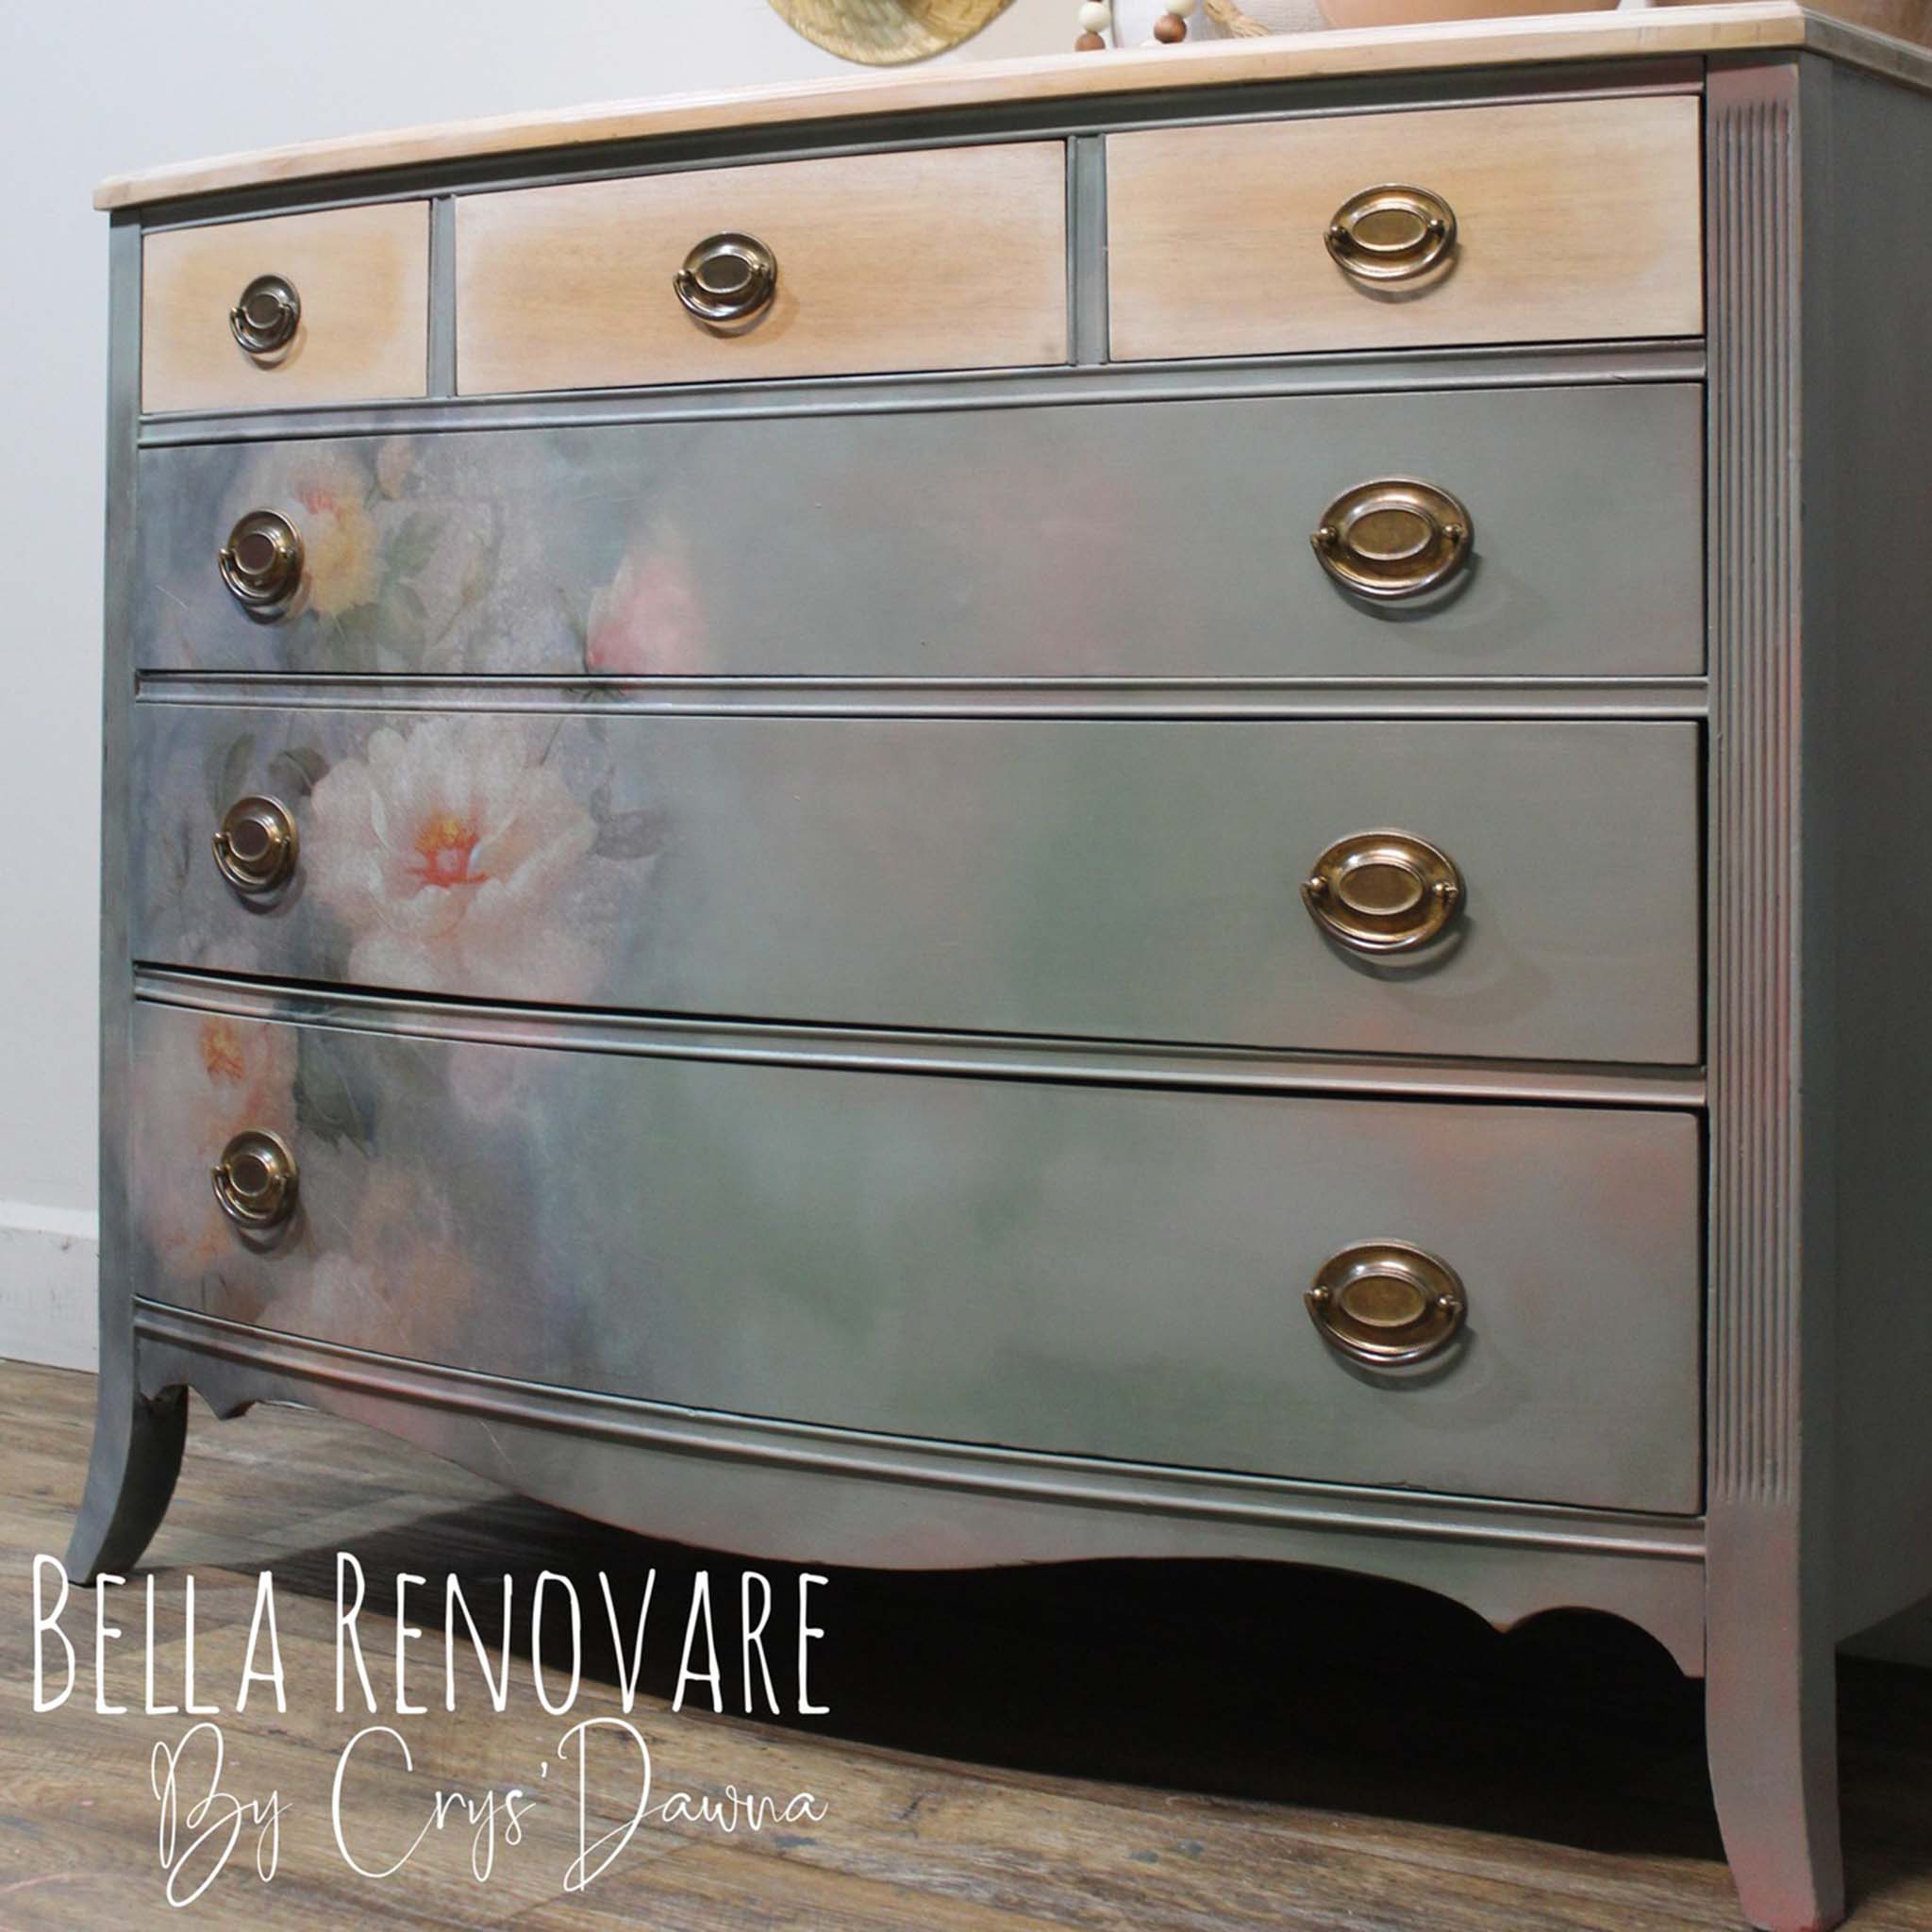 A vintage 6-drawer dresser refurbished by Bella Renovare by Crys'Dawna is painted a blend of very light grey and pink and features Whimsykel's Weathered Roses tissue paper on its 3 large bottom drawers.